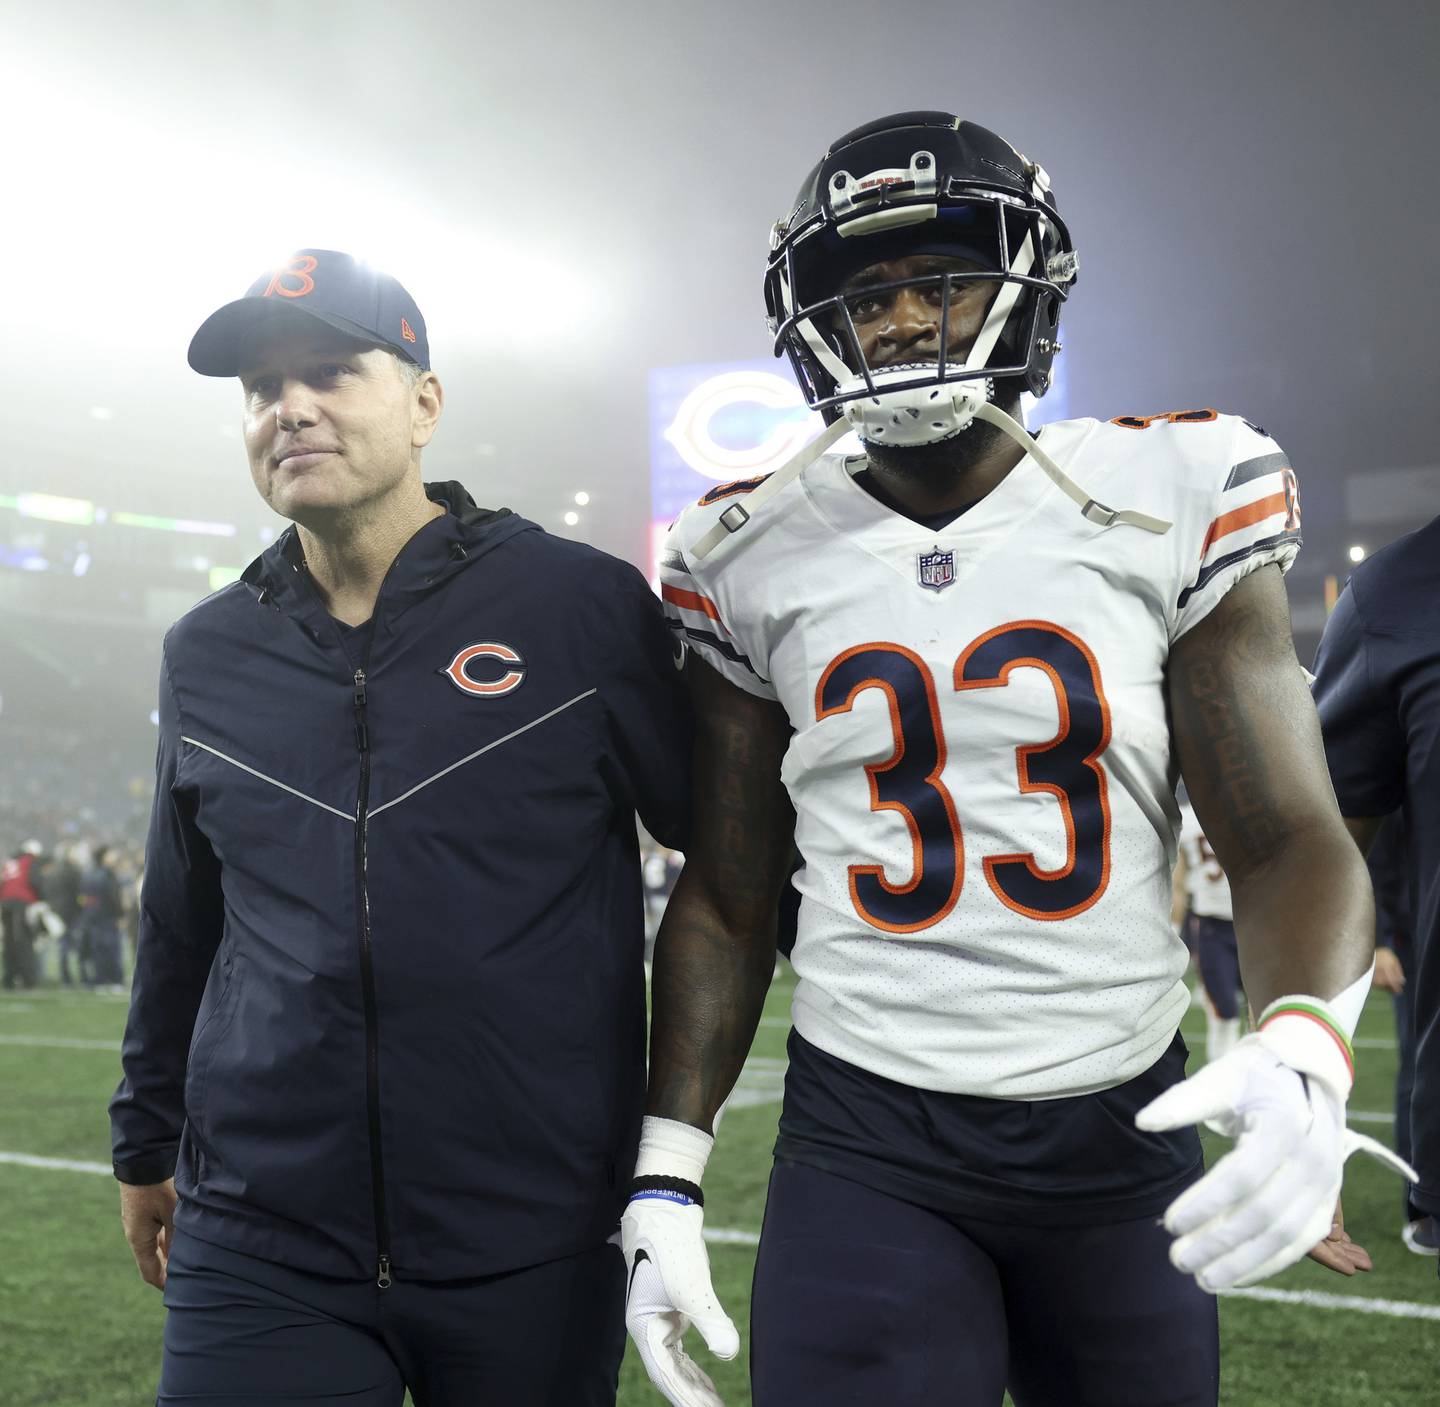 Bears coach Matt Eberflus and cornerback Jaylon Johnson walk off the field together after a 33-14 win over the Patriots on Oct. 24, 2022, at Gillette Stadium in Foxborough, Mass.